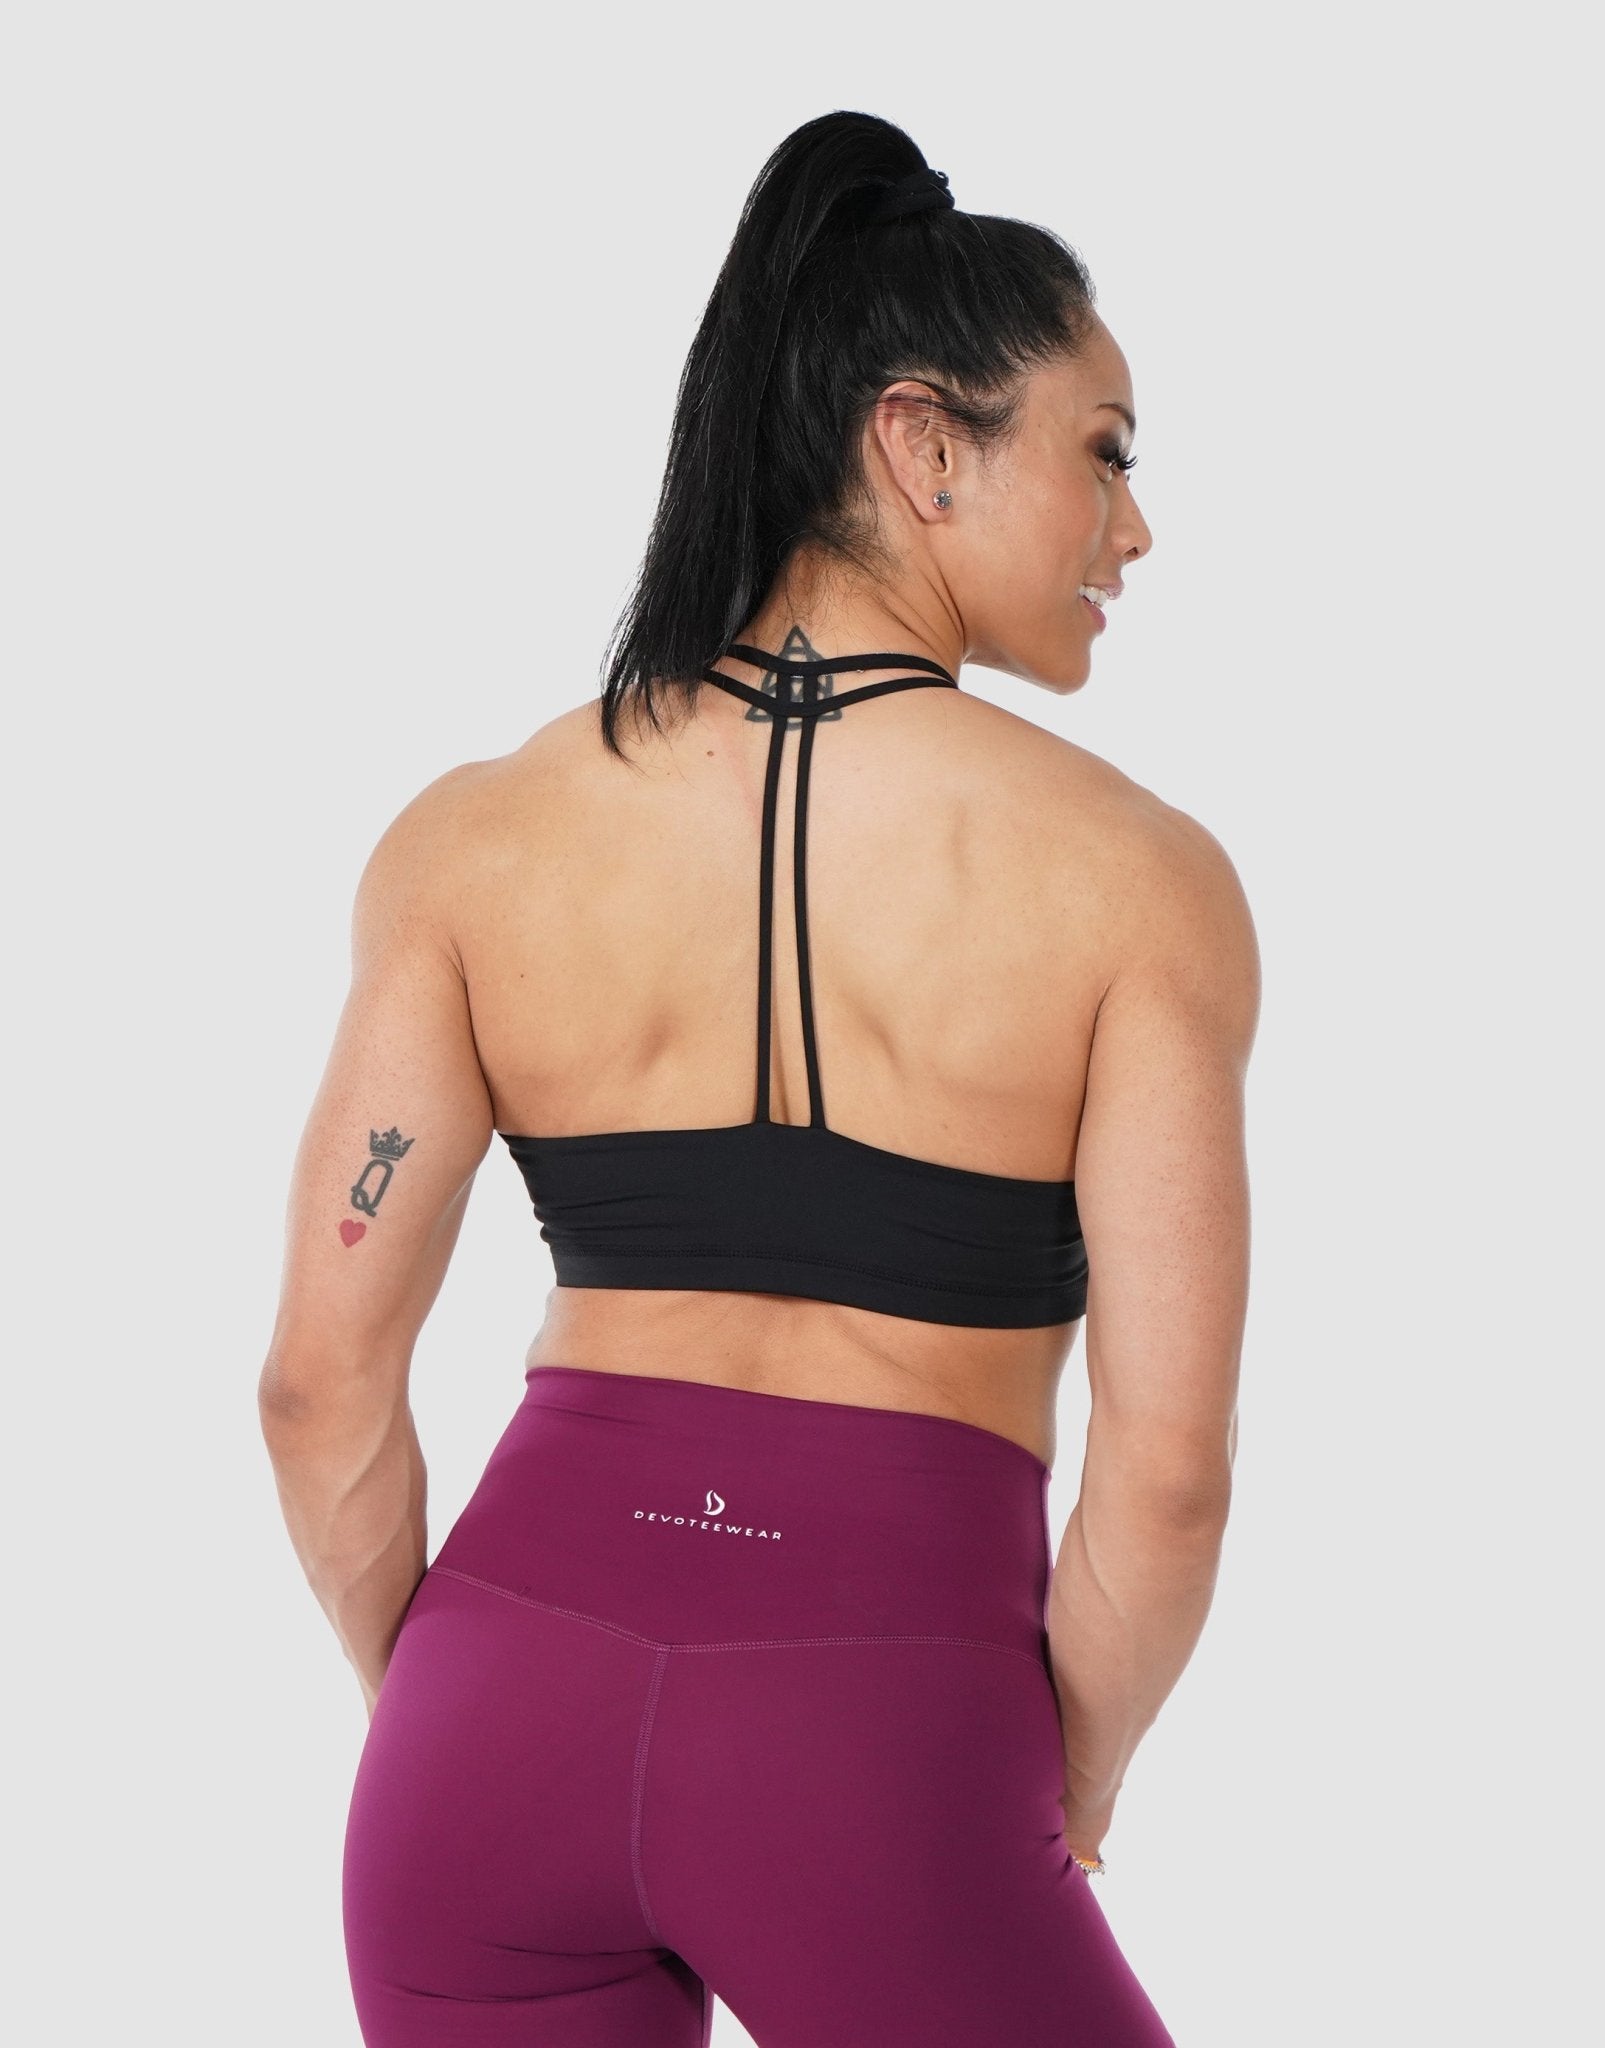 $16.95 for a Women's Sports Bra (a $38.50 Value)